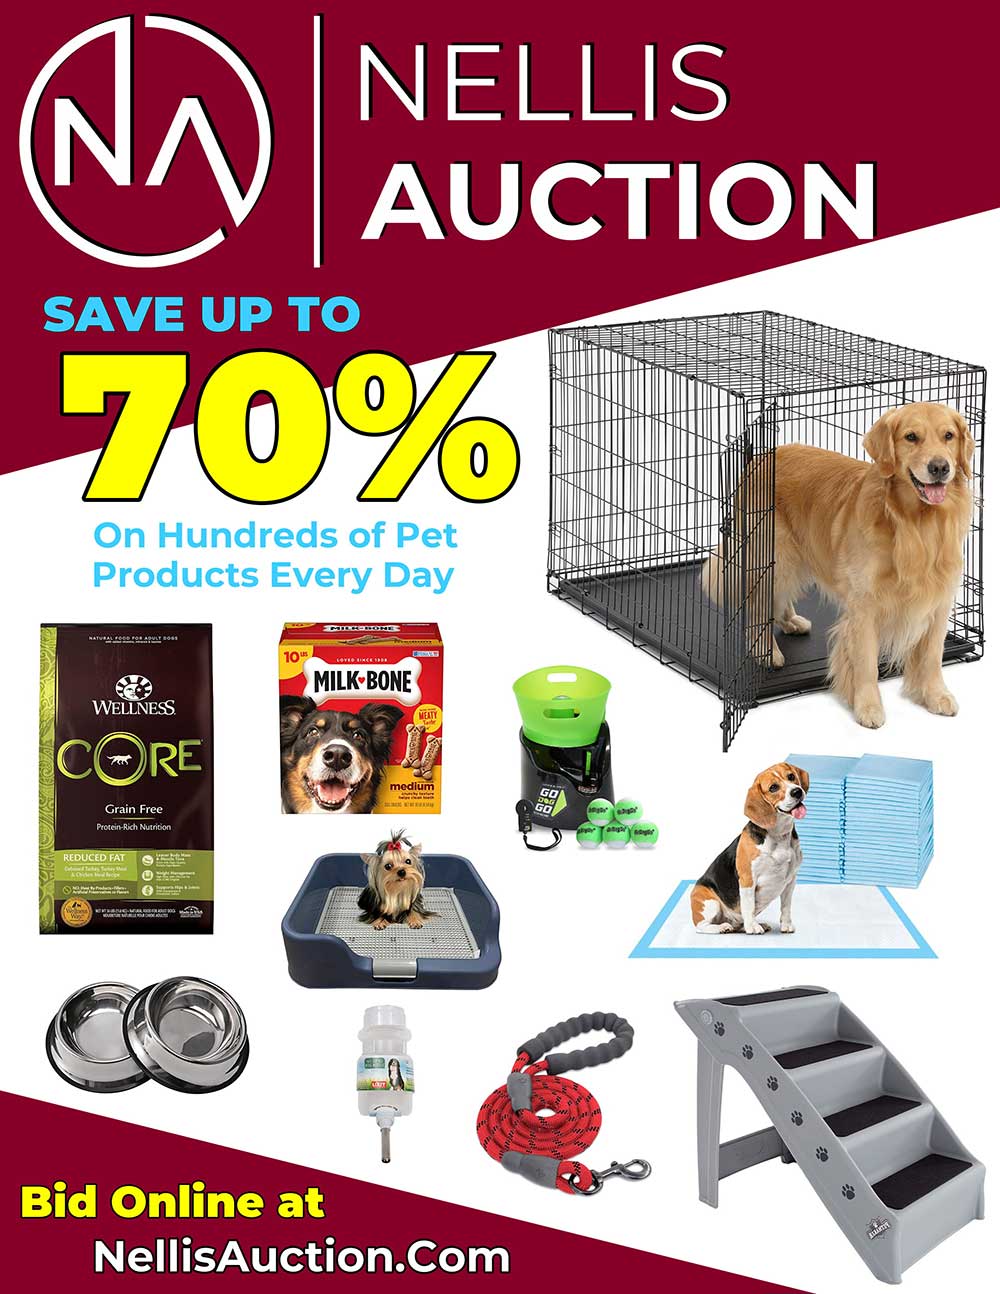 Nellis Auction Save up to 70% on hudreds of pet products every day